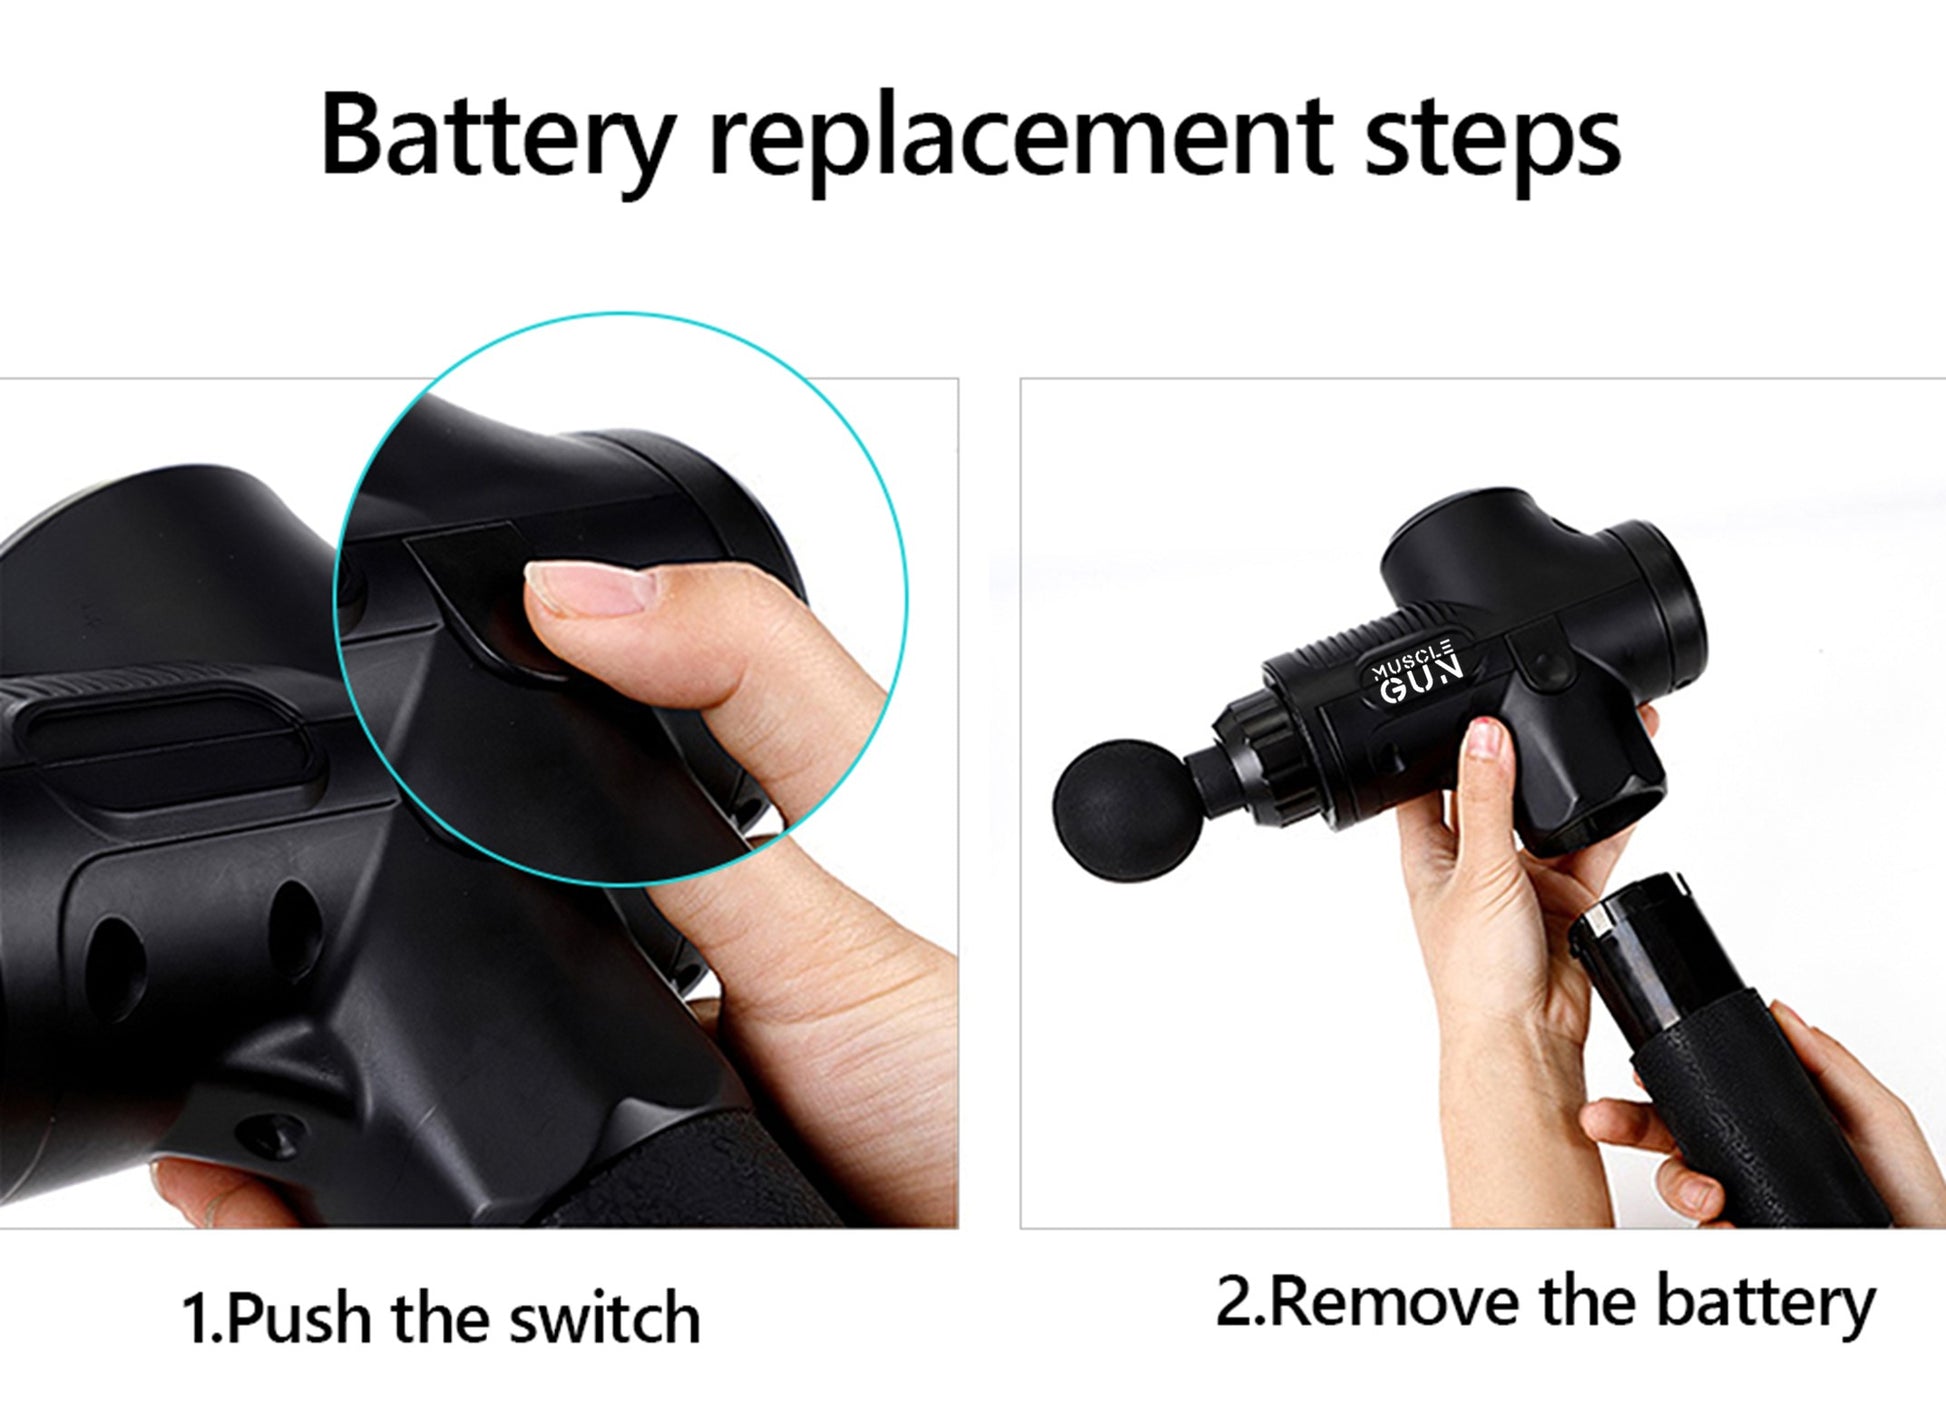 Battery replacement tips